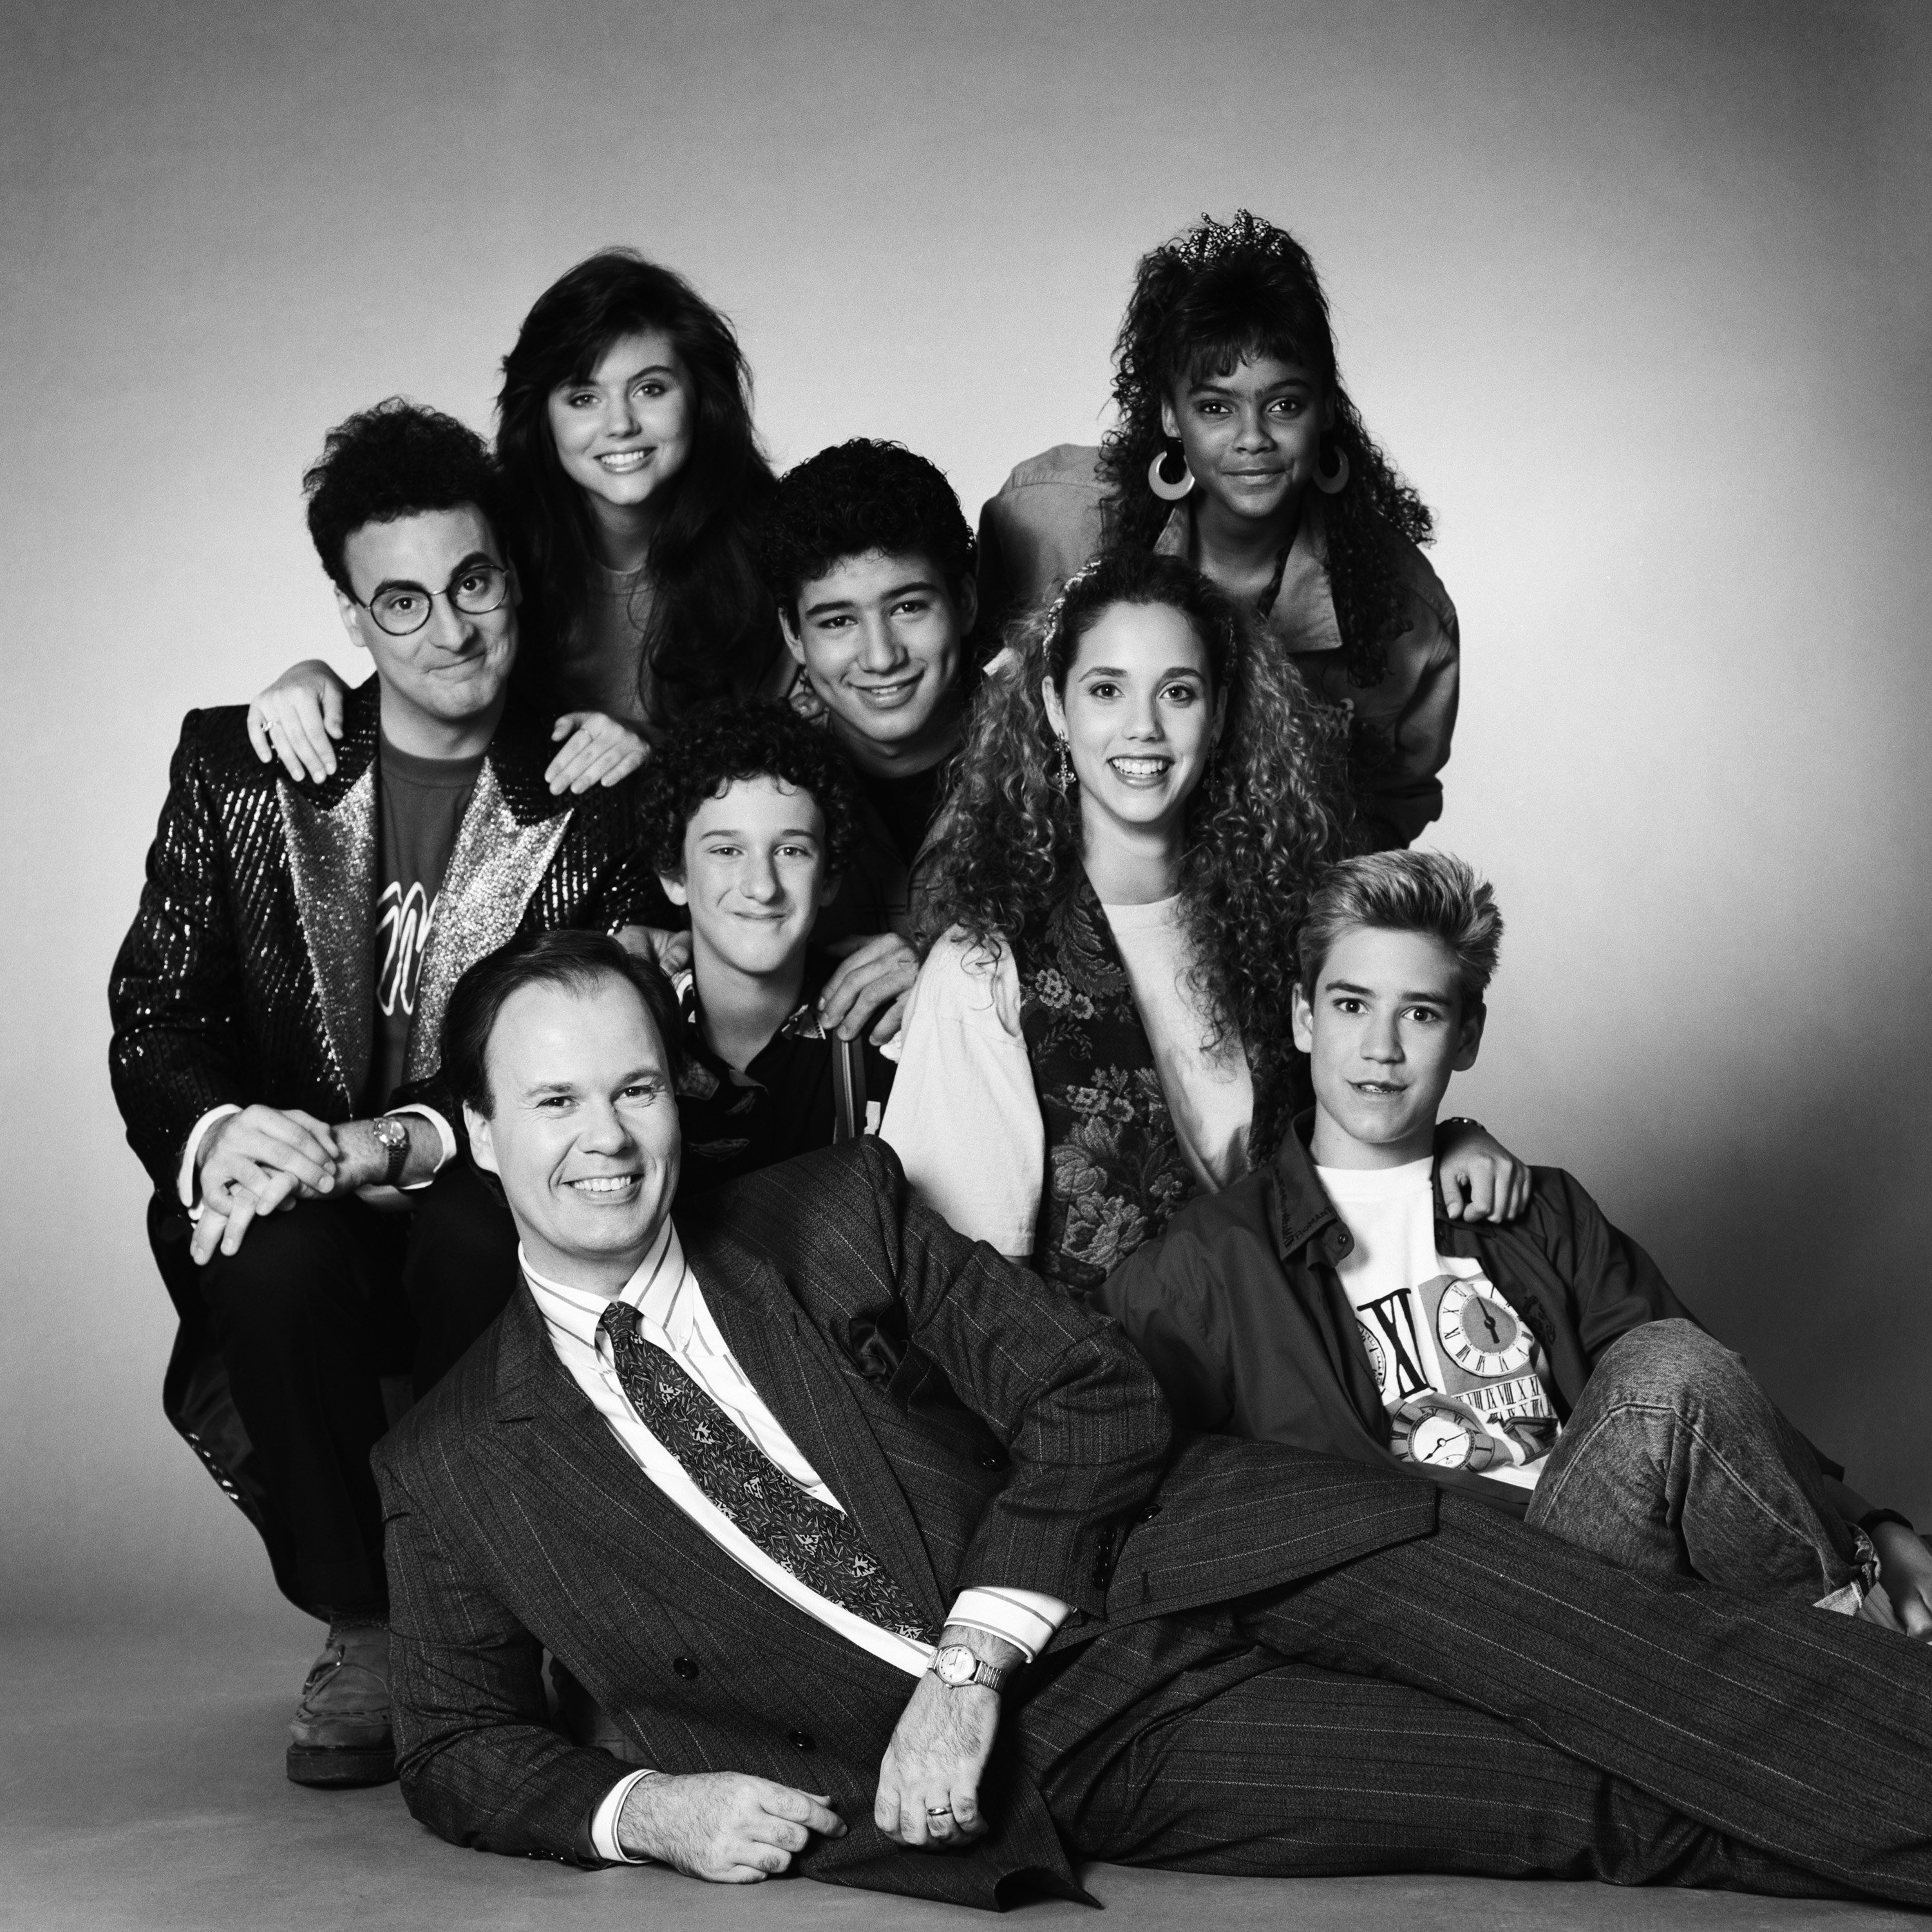 The cast of the successful teen show 'Saved by the Bell' pose for photos ahead of the series first season